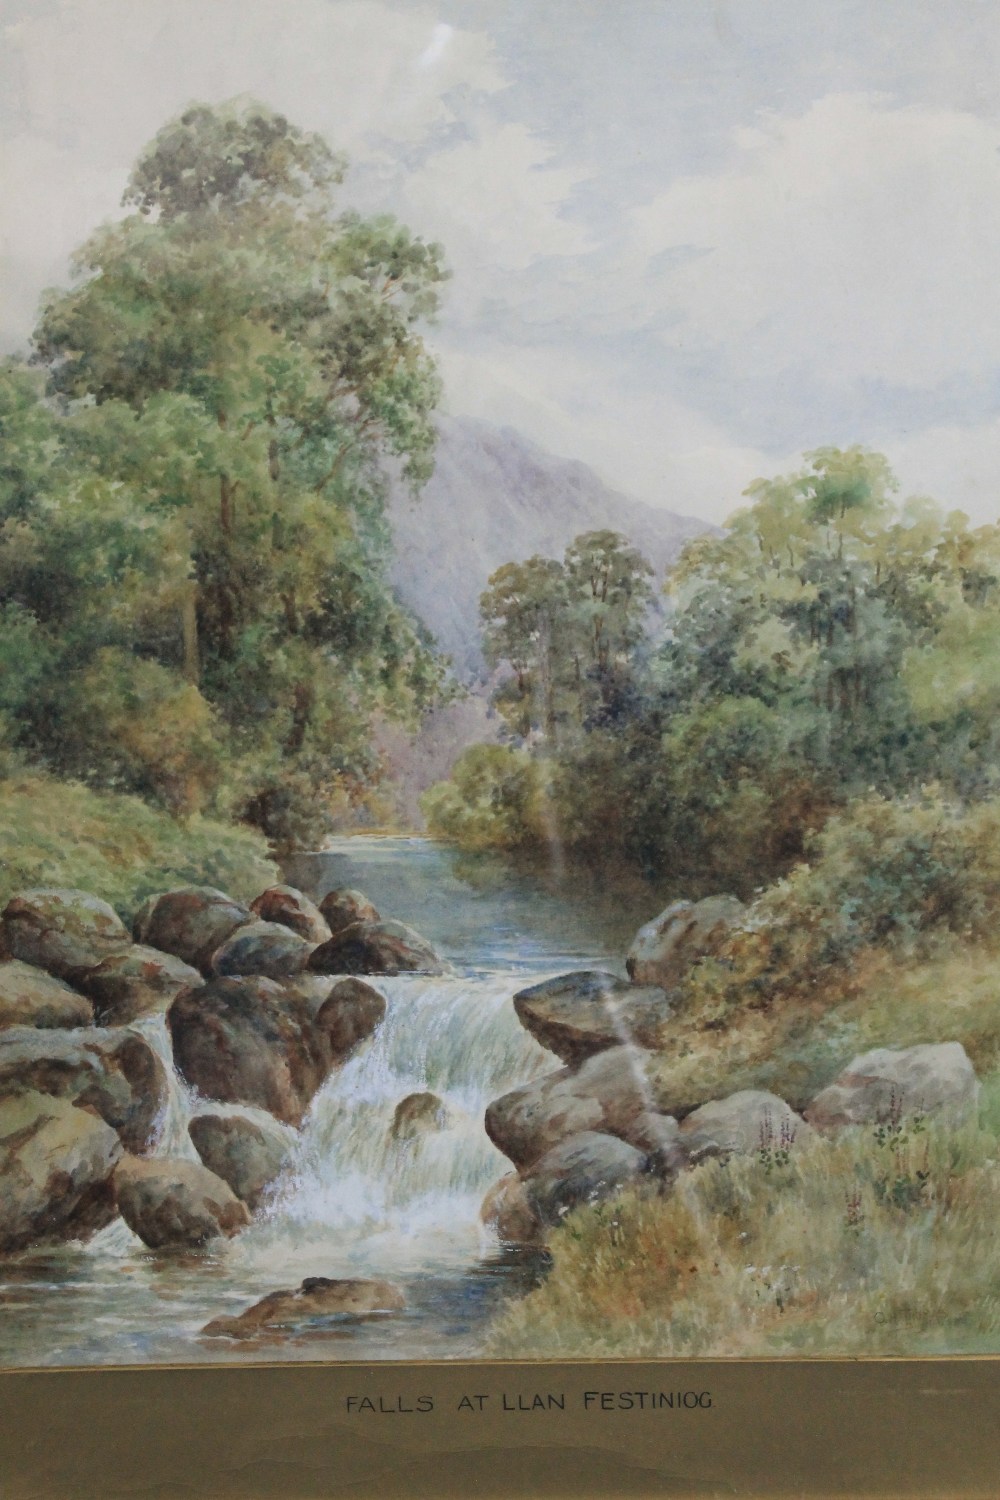 D.H THOMAS, ( WELSH, EARLY 20TH CENTURY), "Falls At Llan Ffestiniog", signed, watercolours. 22" x